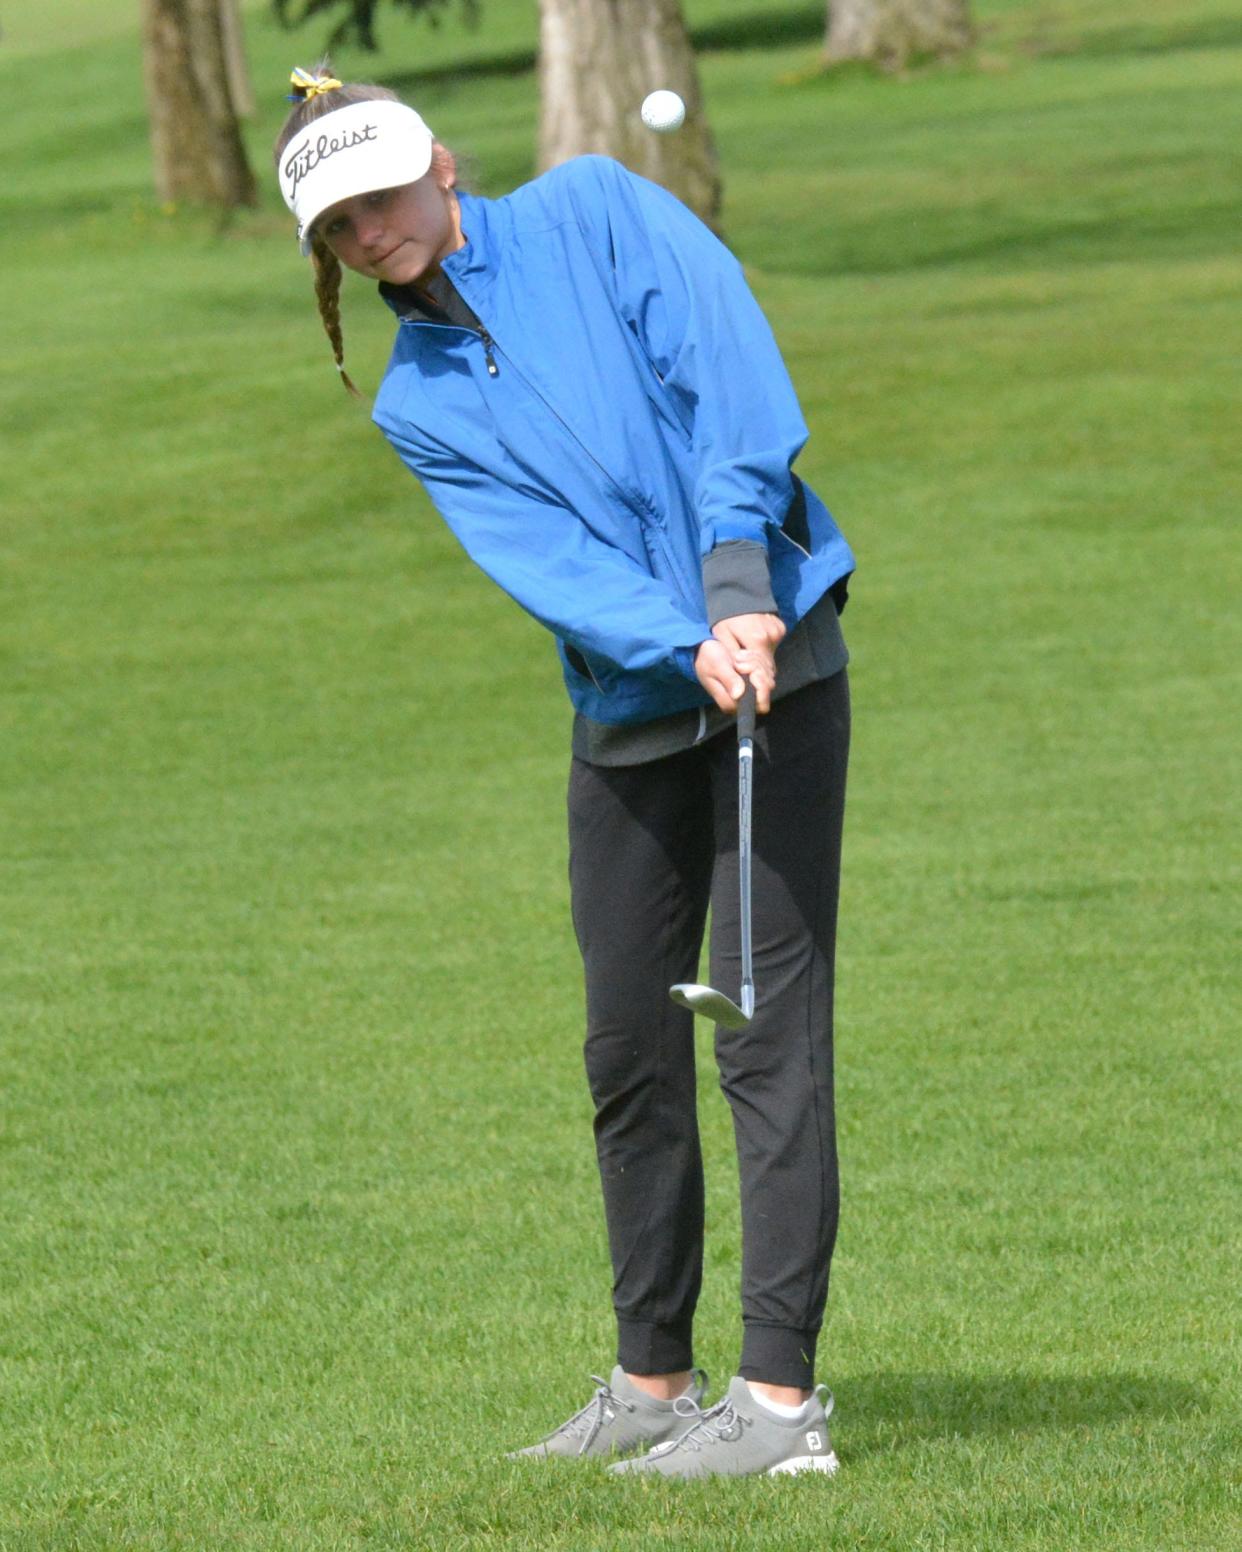 Aberdeen Central's Emma Dohrer pitches to No. 1 Yellow during the Watertown Girls Golf Invitational at Cattail Crossing Golf Course earlier this season.